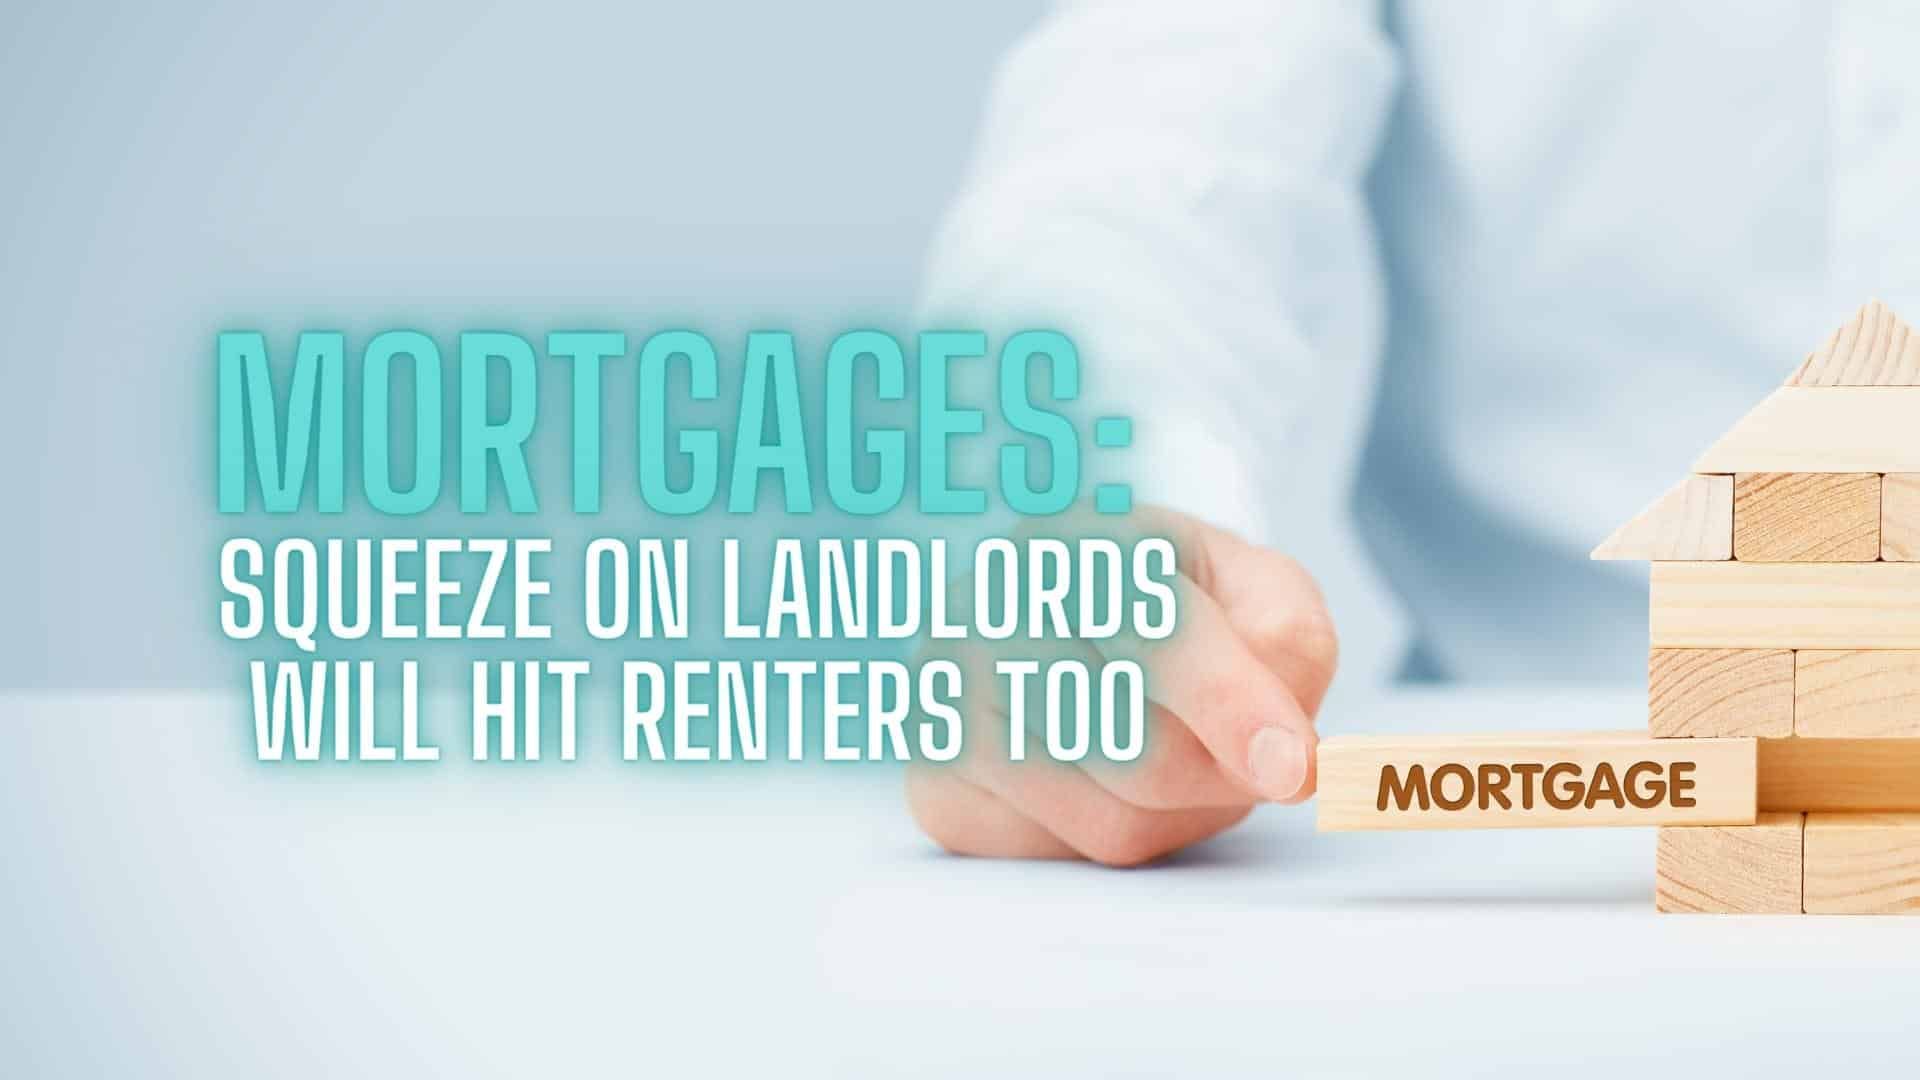 Mortgages: Squeeze On Landlords Will Hit Renters Too